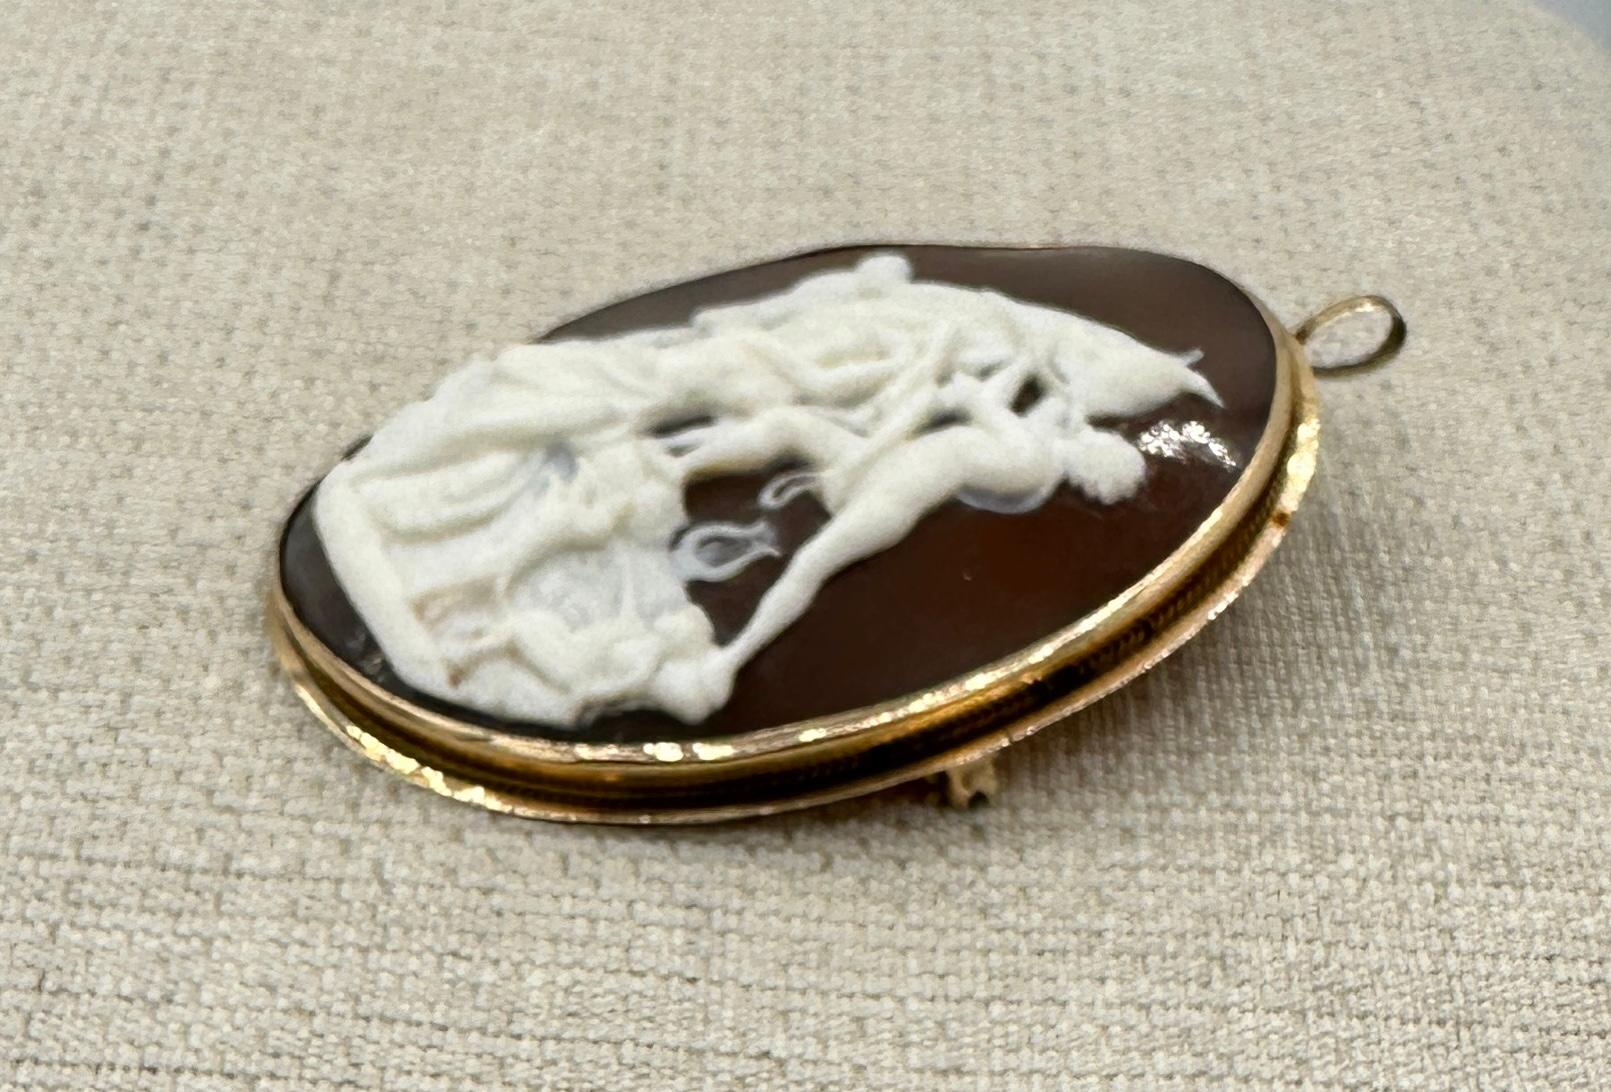 Women's or Men's Taurus Bull Europa Goddess Zeus Dog Cameo Pendant Brooch Necklace Gold Antique For Sale